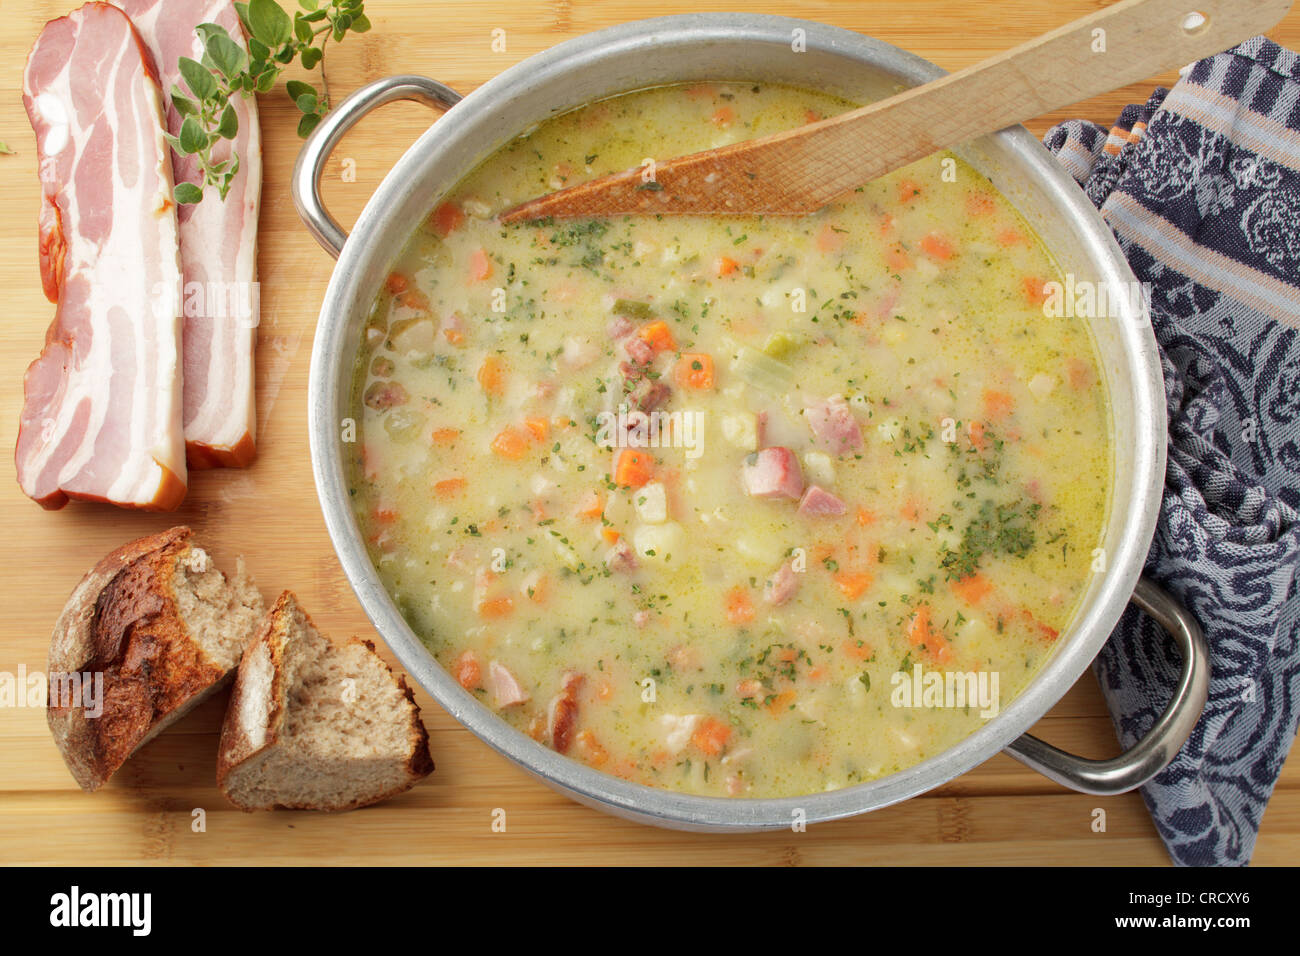 Potato soup with smoked meat cubes and bacon, bread and lean bacon Stock Photo